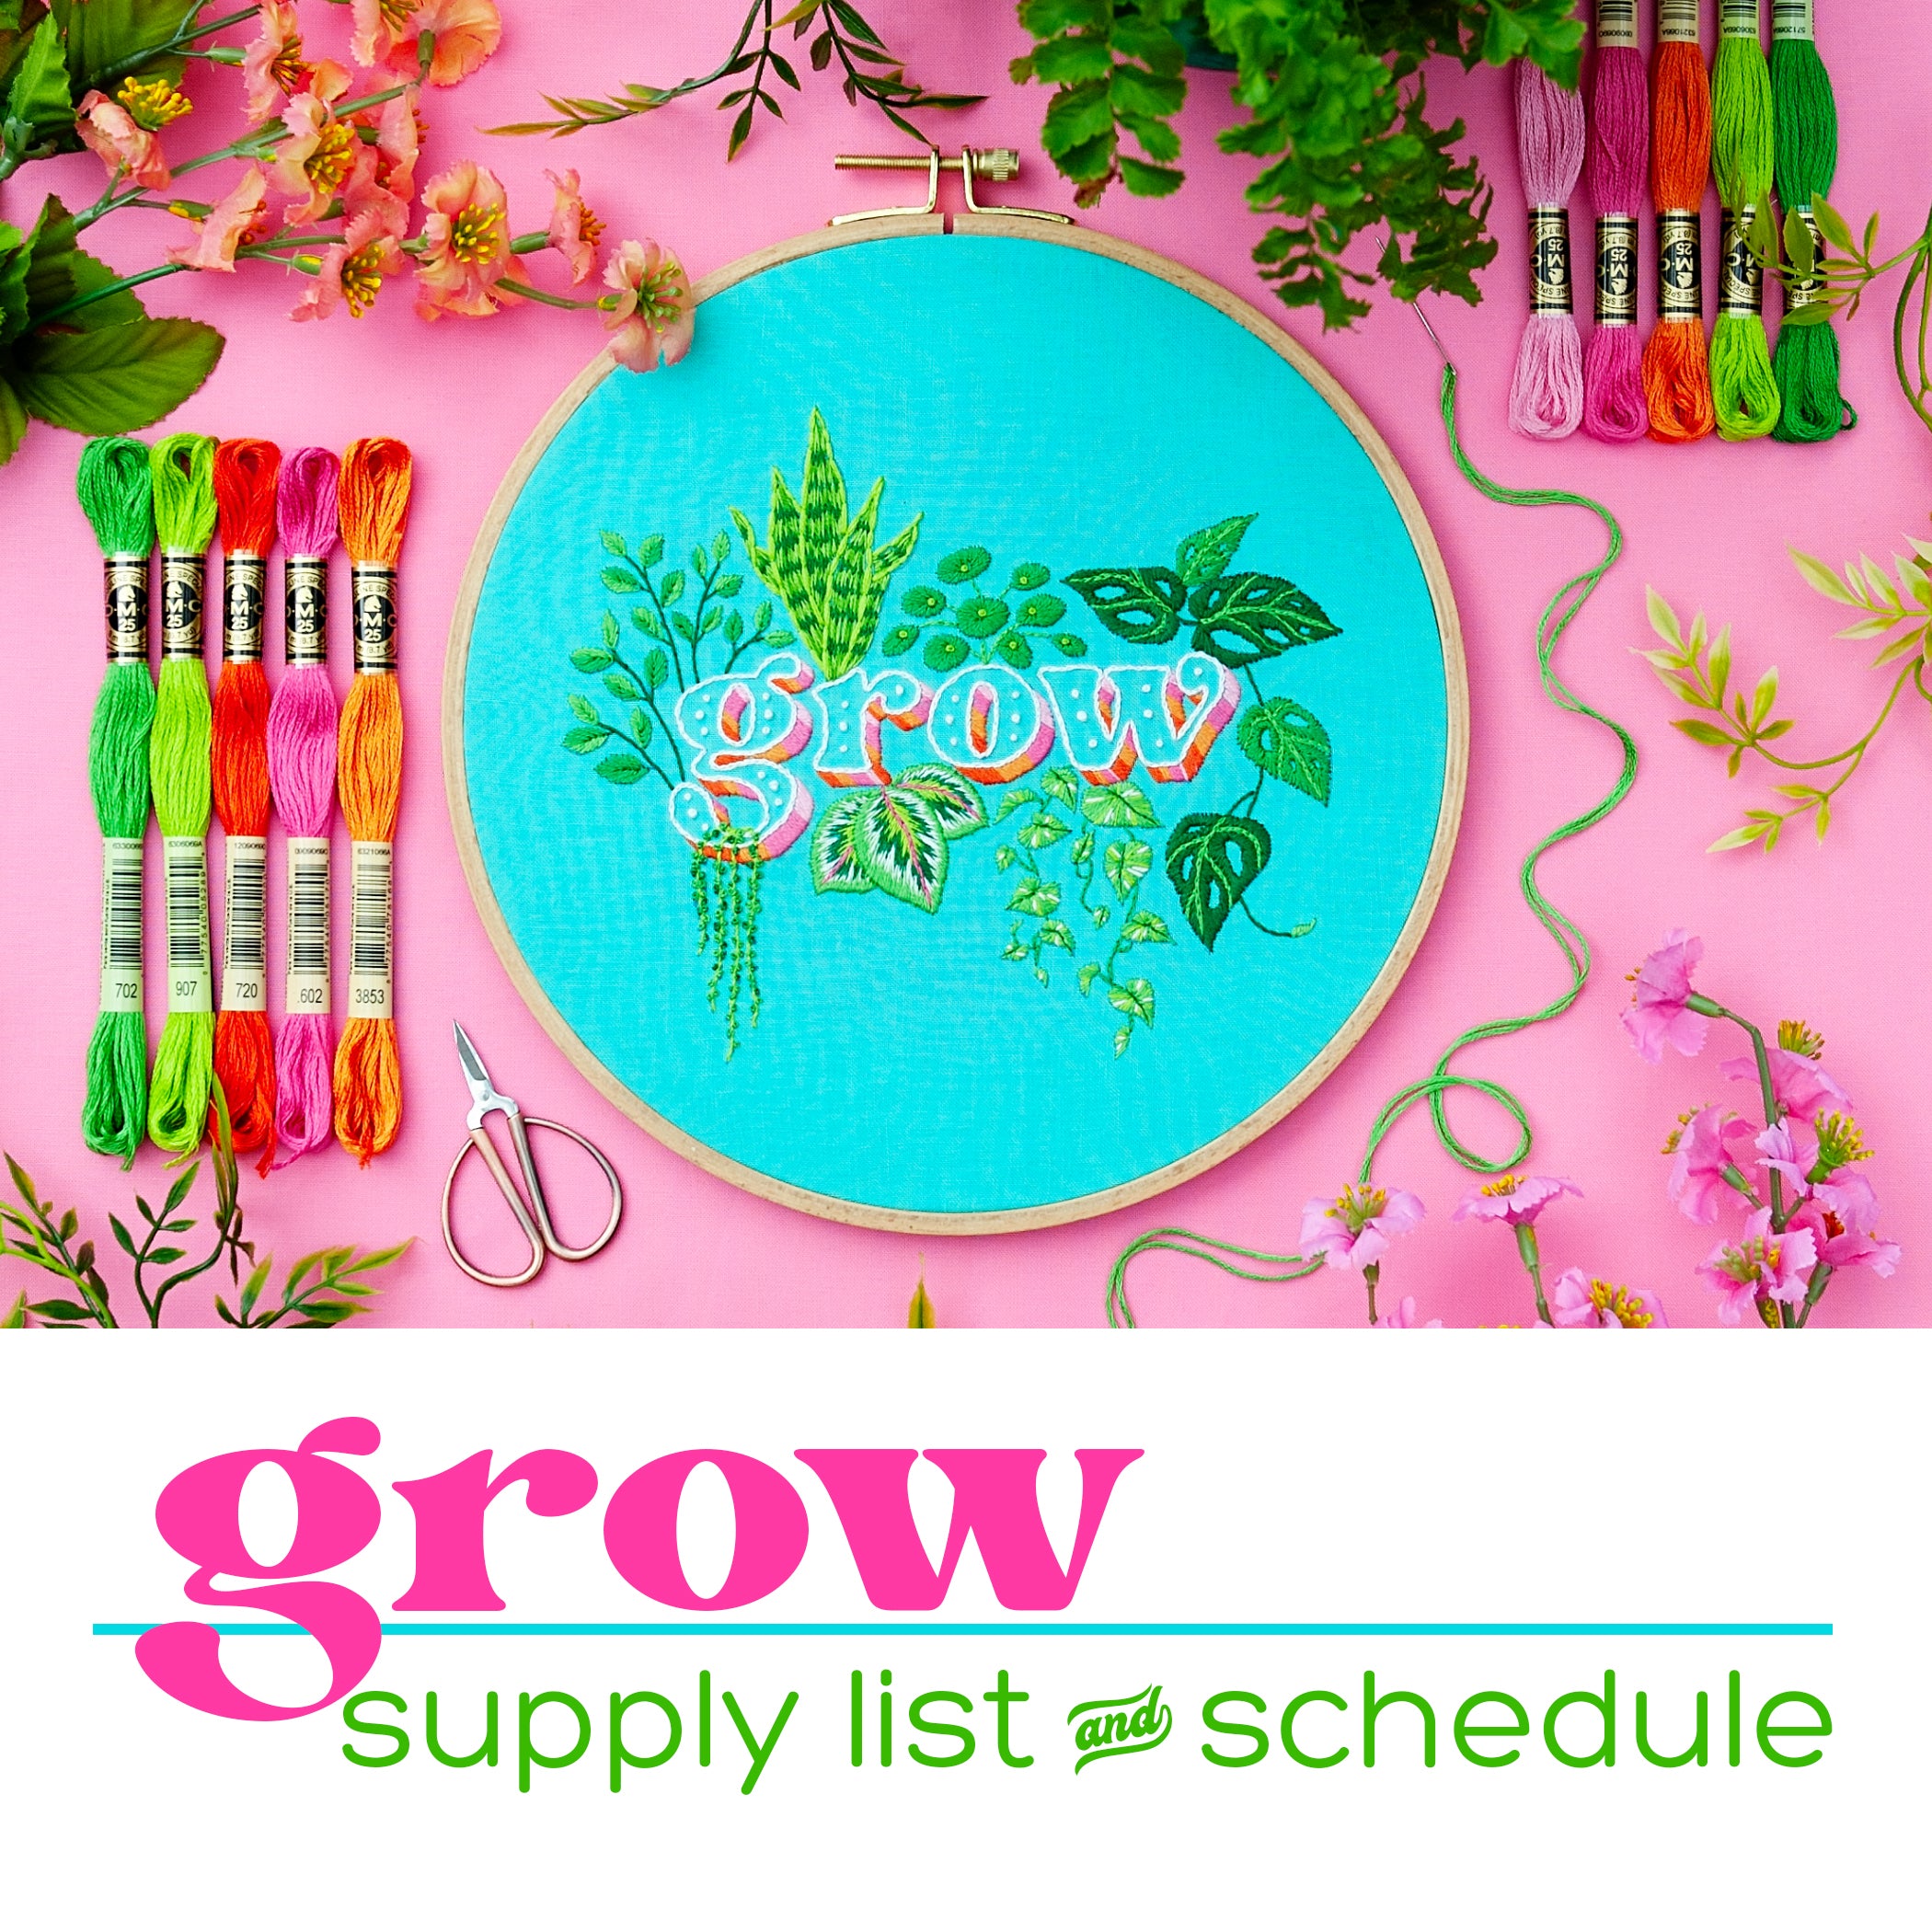 Embroidery Supply List for Beginners